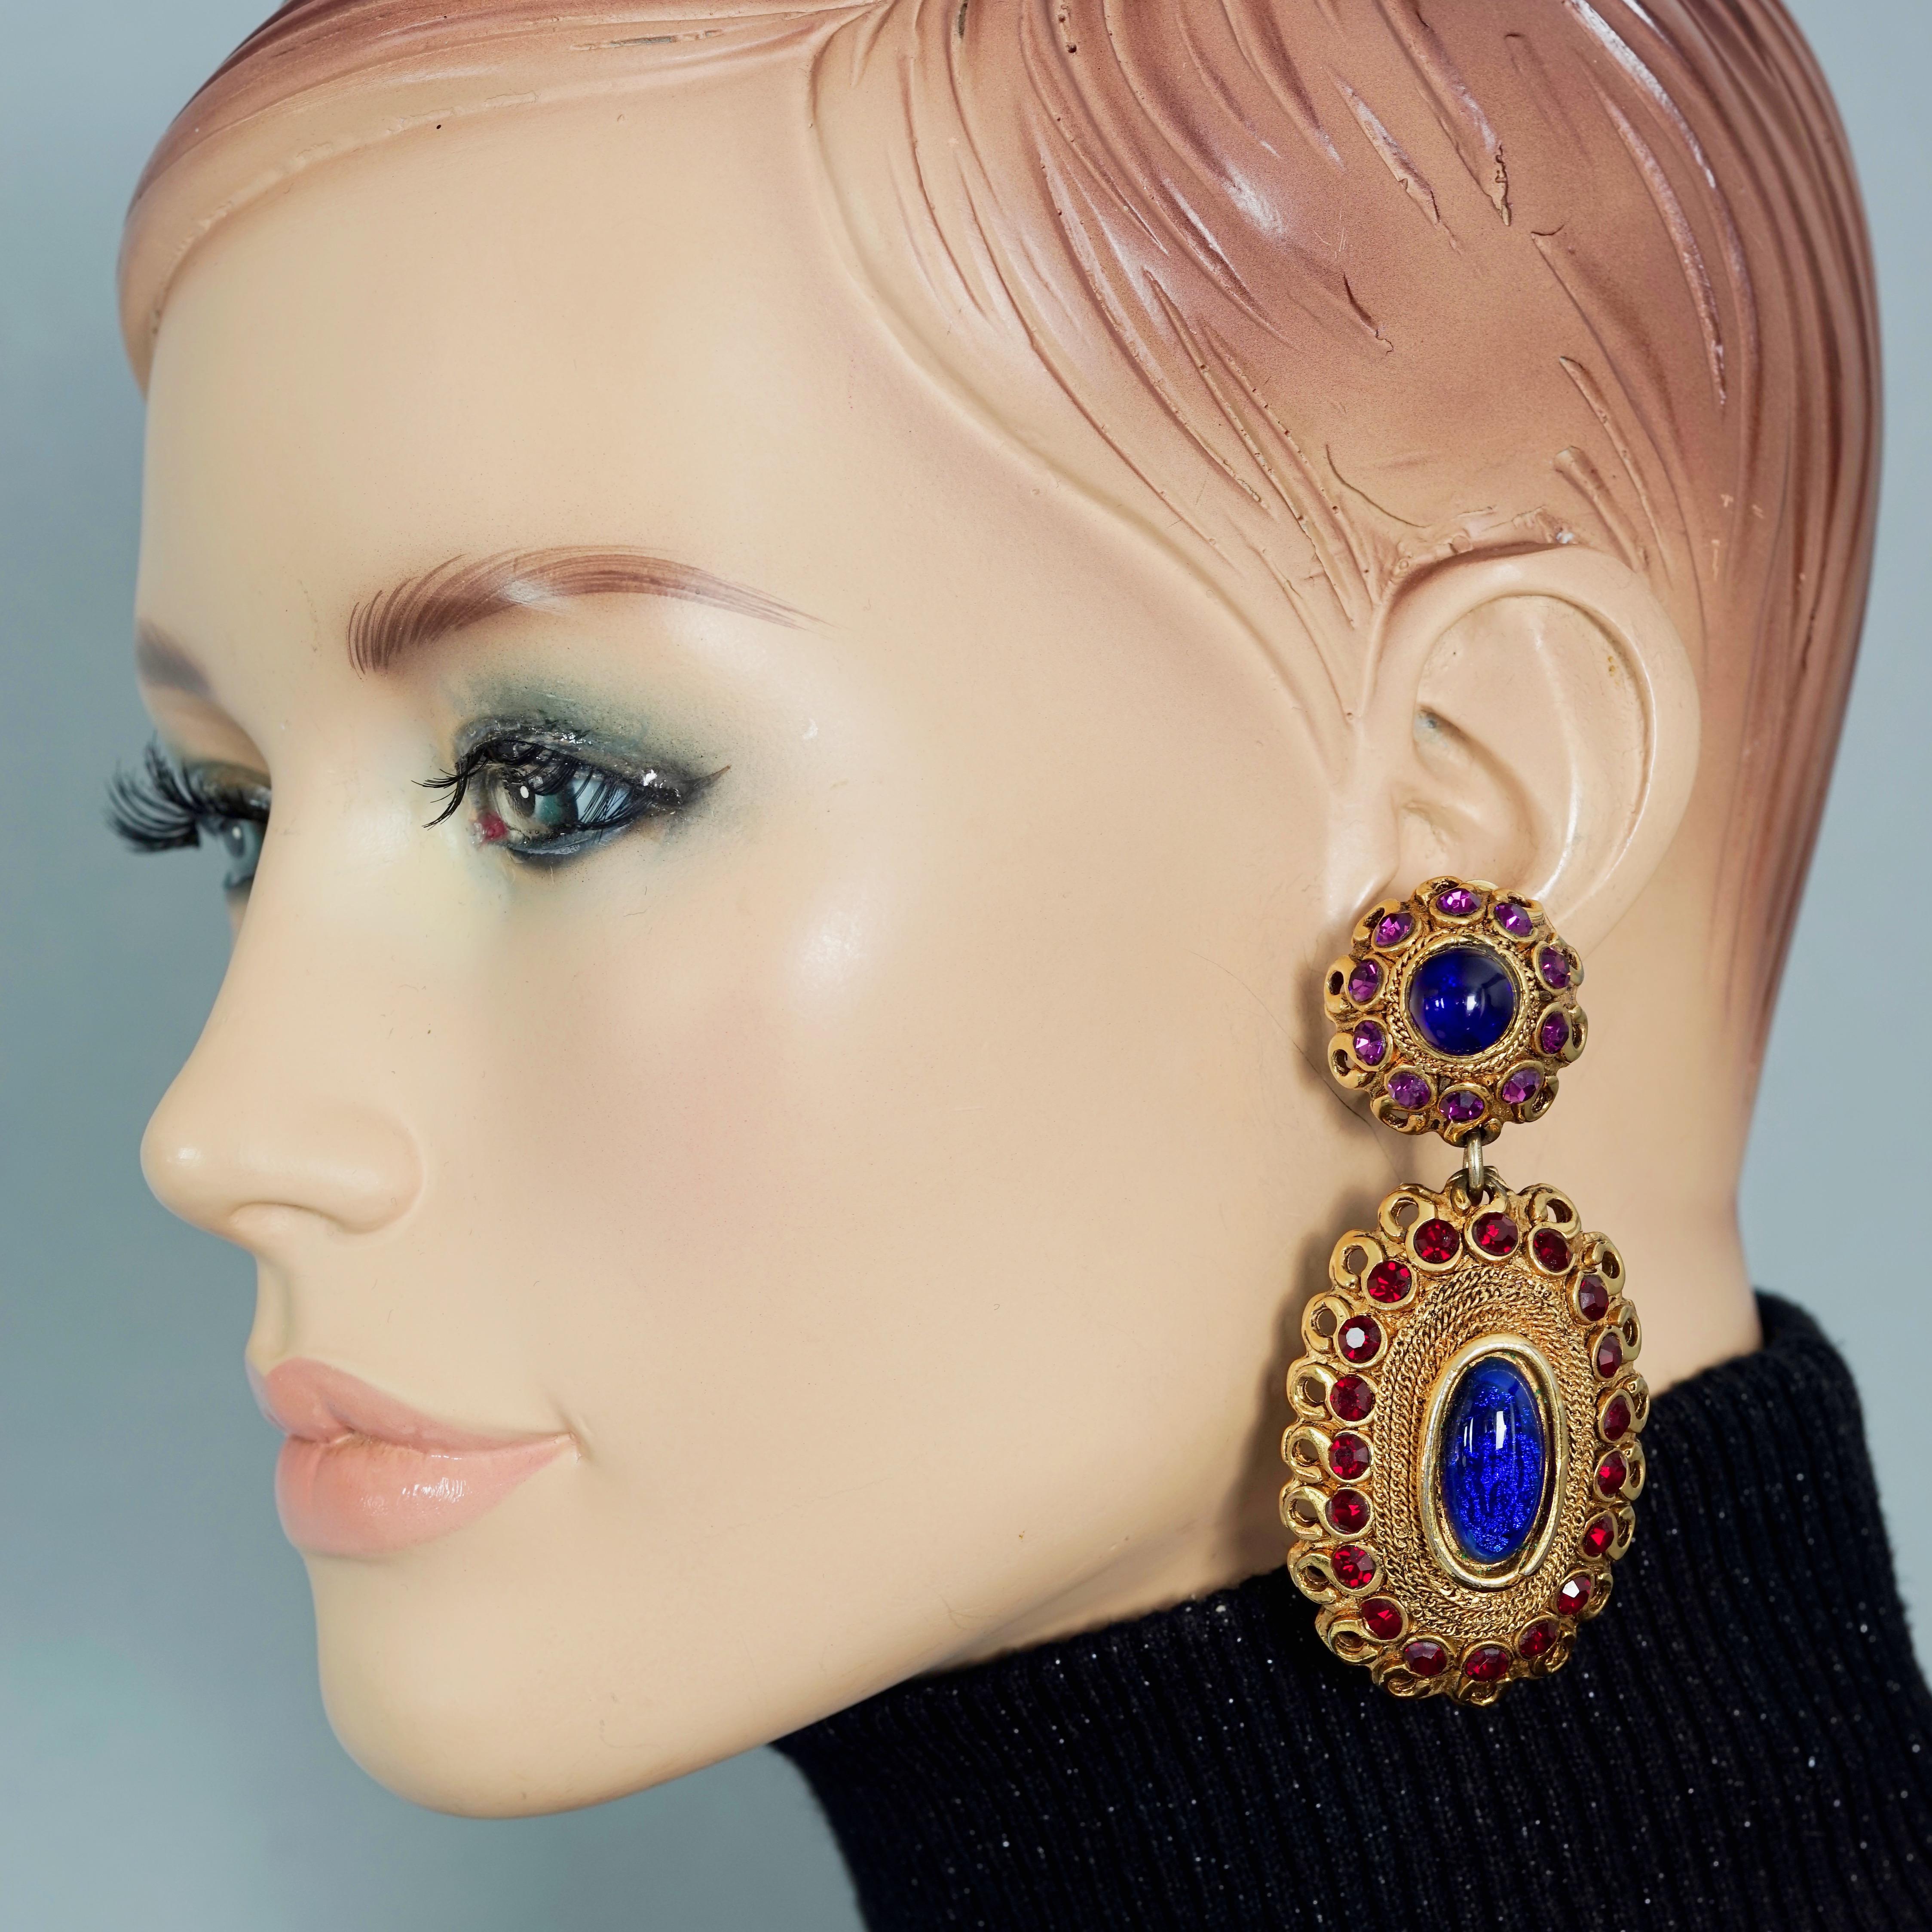 Vintage CLAIRE DEVE Byzantine Glass Cabochon Dangling Earrings

Measurements: 
Height: 3.54 inches (9 cm)
Width: 1.38 inches (3.5 cm)
Weight per Earring: 23 grams

Features:
- 100% Authentic CLAIRE DEVE.
- Large Byzantine style dangling earrings